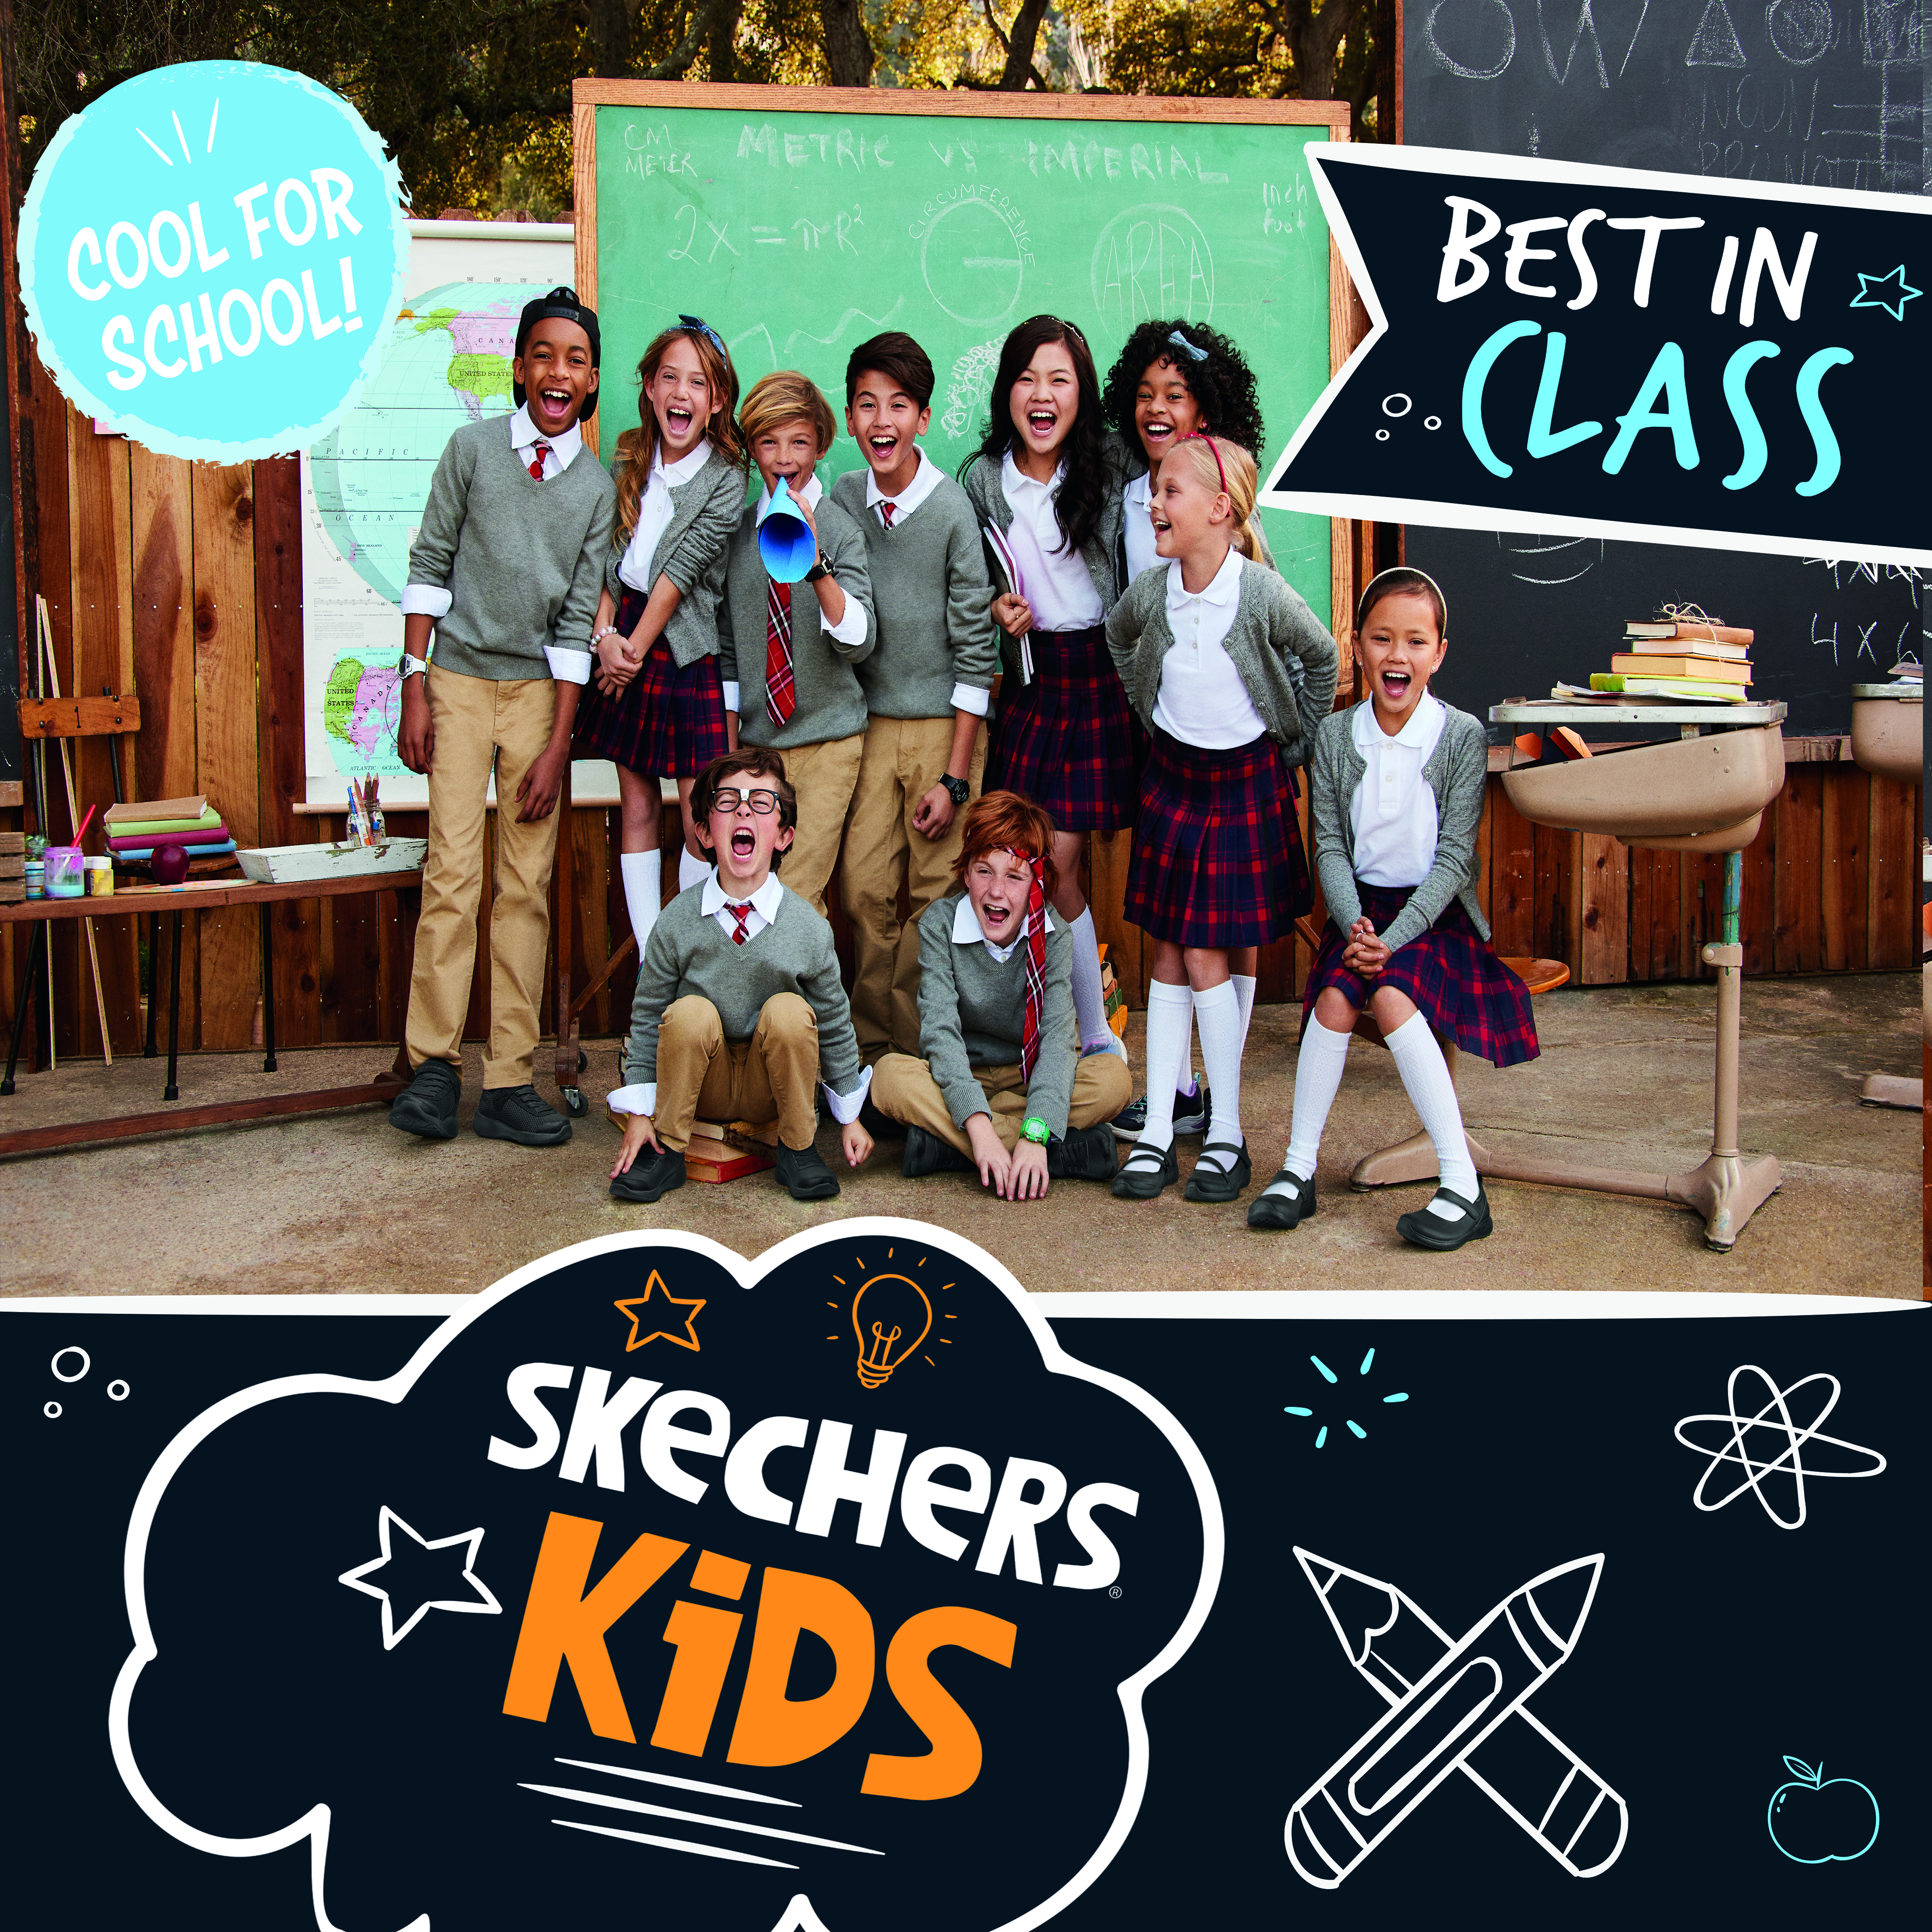 Comfort is cool for back to school with SKECHERS